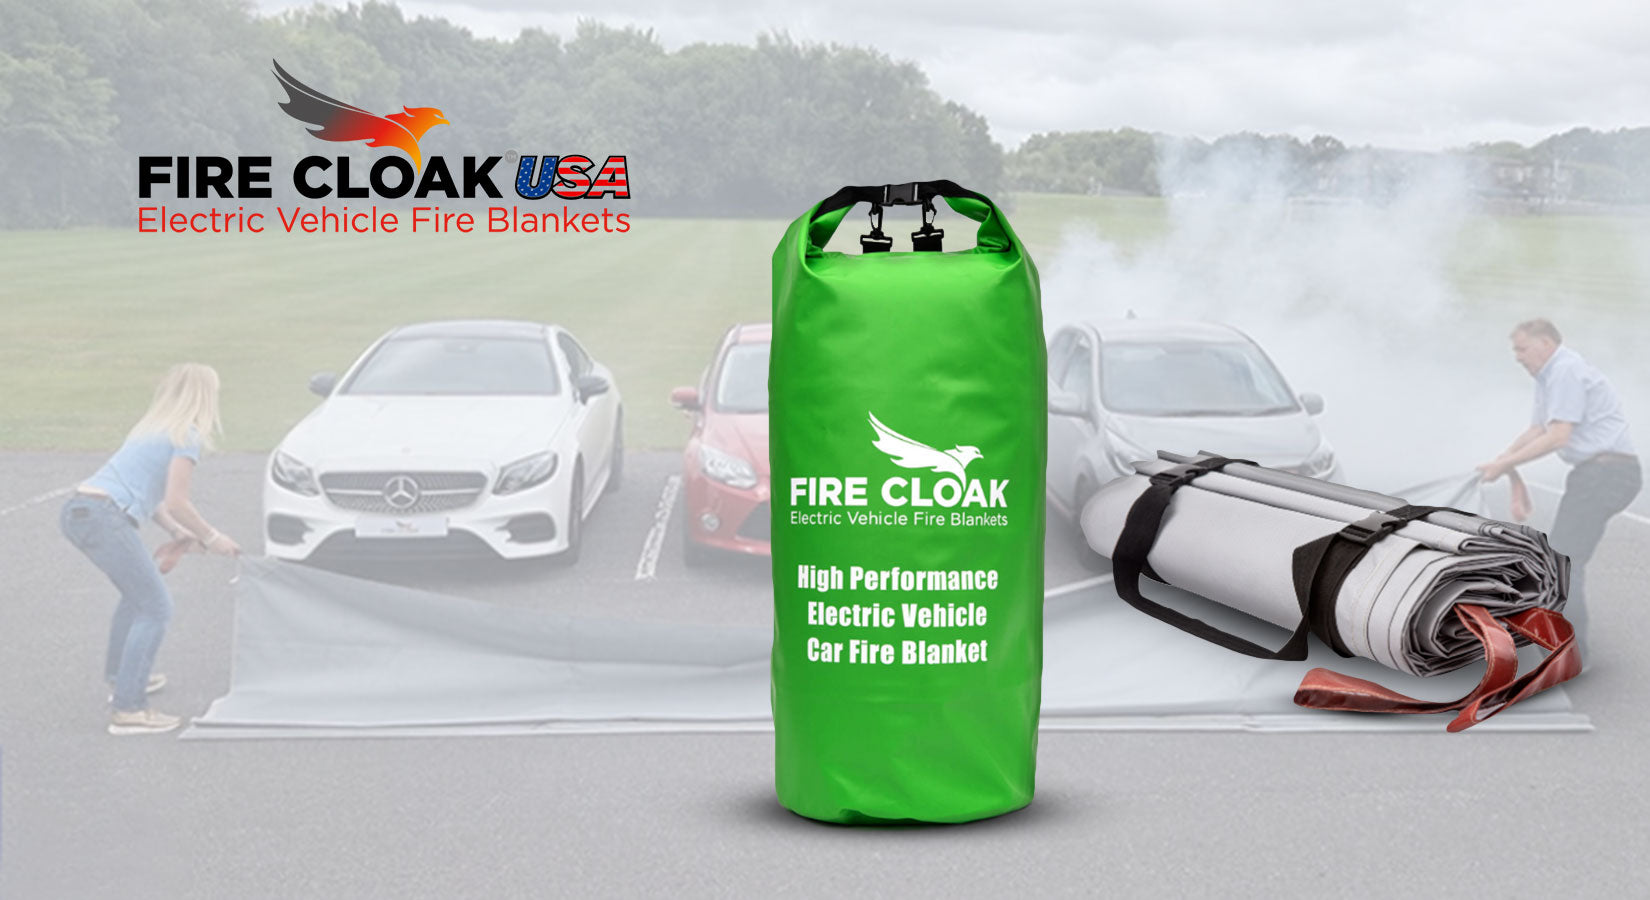 Secure Your Electric Vehicle with the EV Car Fire Blanket from Fire Cloak USA | All Security Equipment